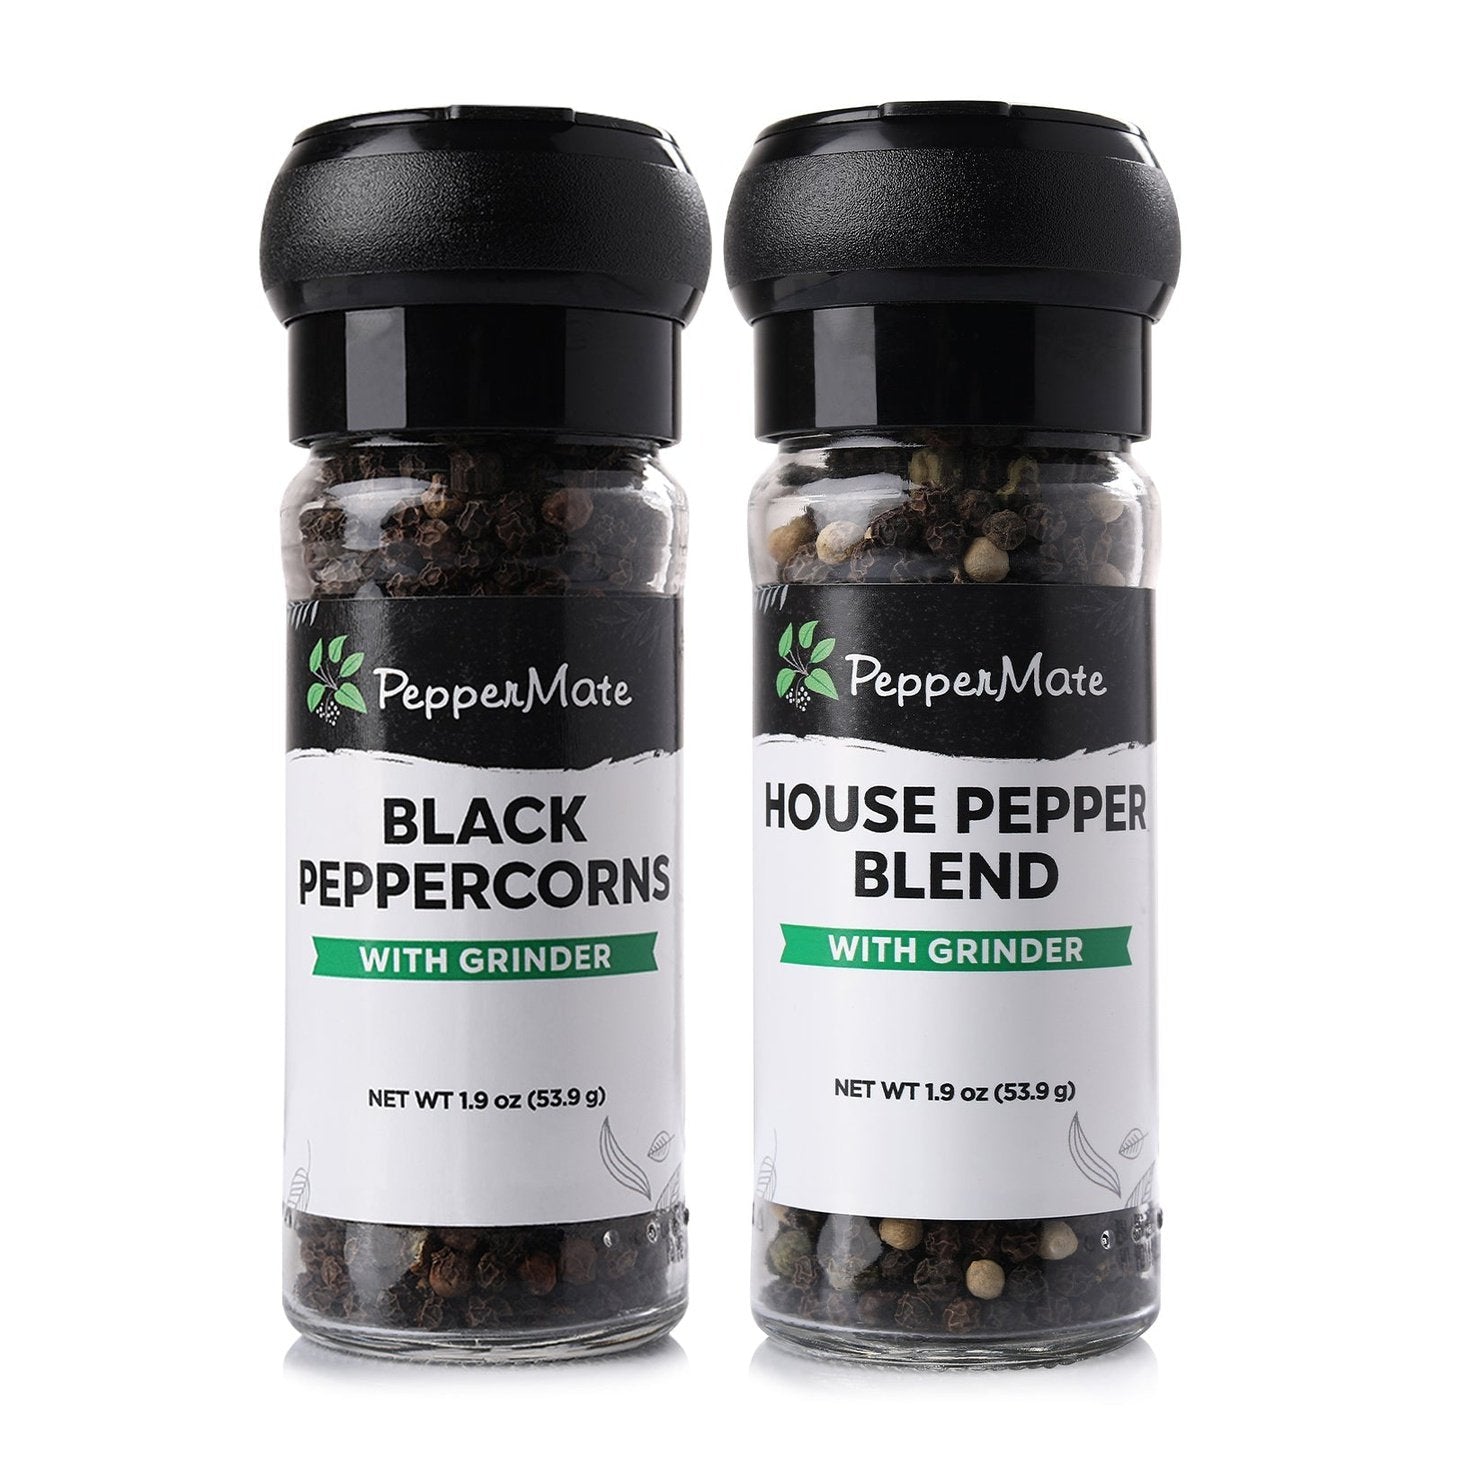  PepperMate Traditional Pepper Mill 723 - Turnkey High